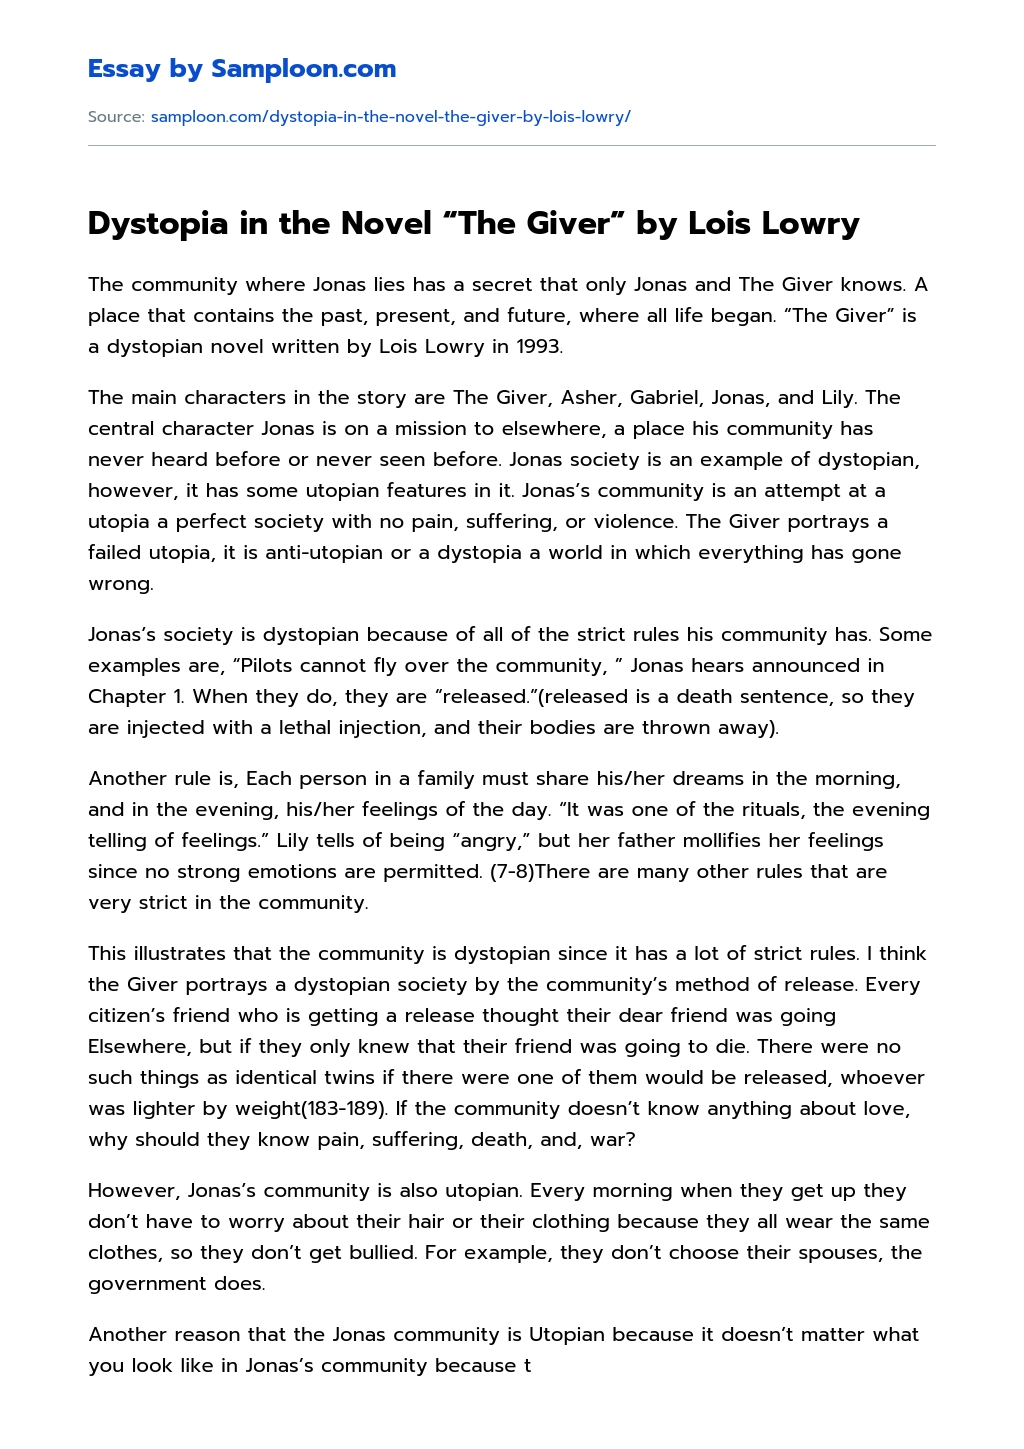 Dystopia in the Novel “The Giver” by Lois Lowry essay